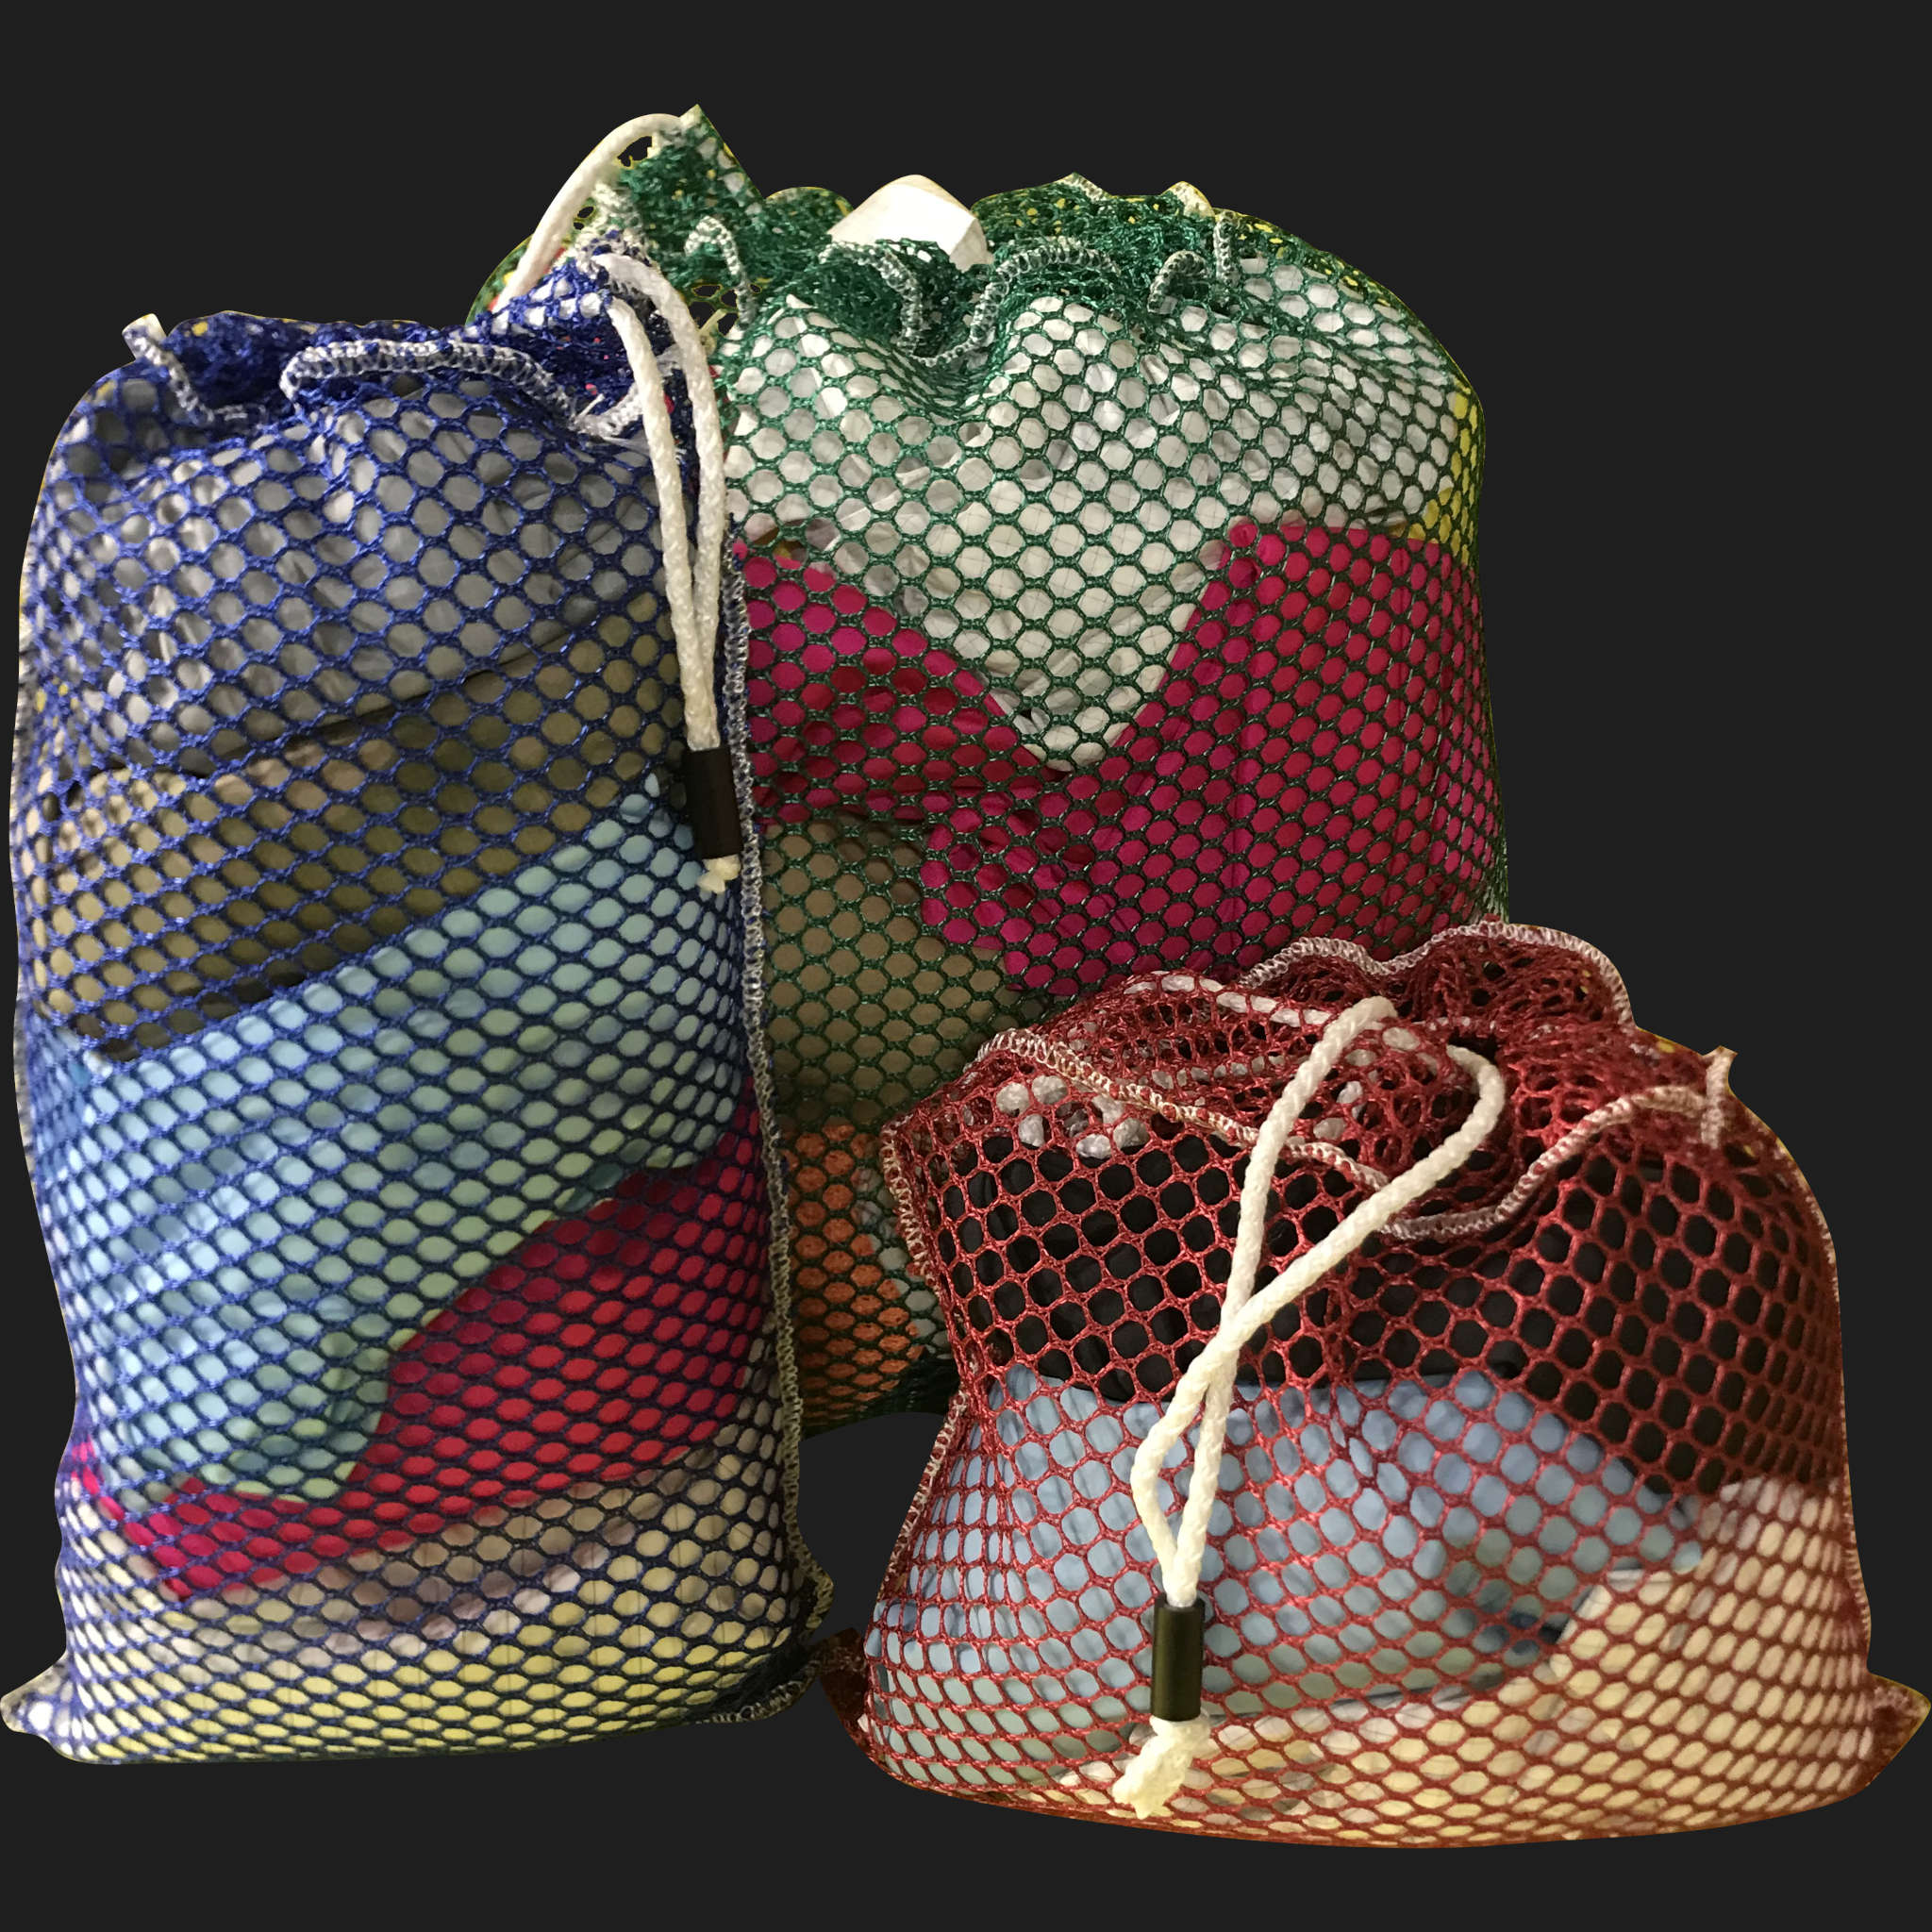 20" x 28" Customized Mesh-Net-Laundry Bags Heavy Duty with Cord and barrellock closure